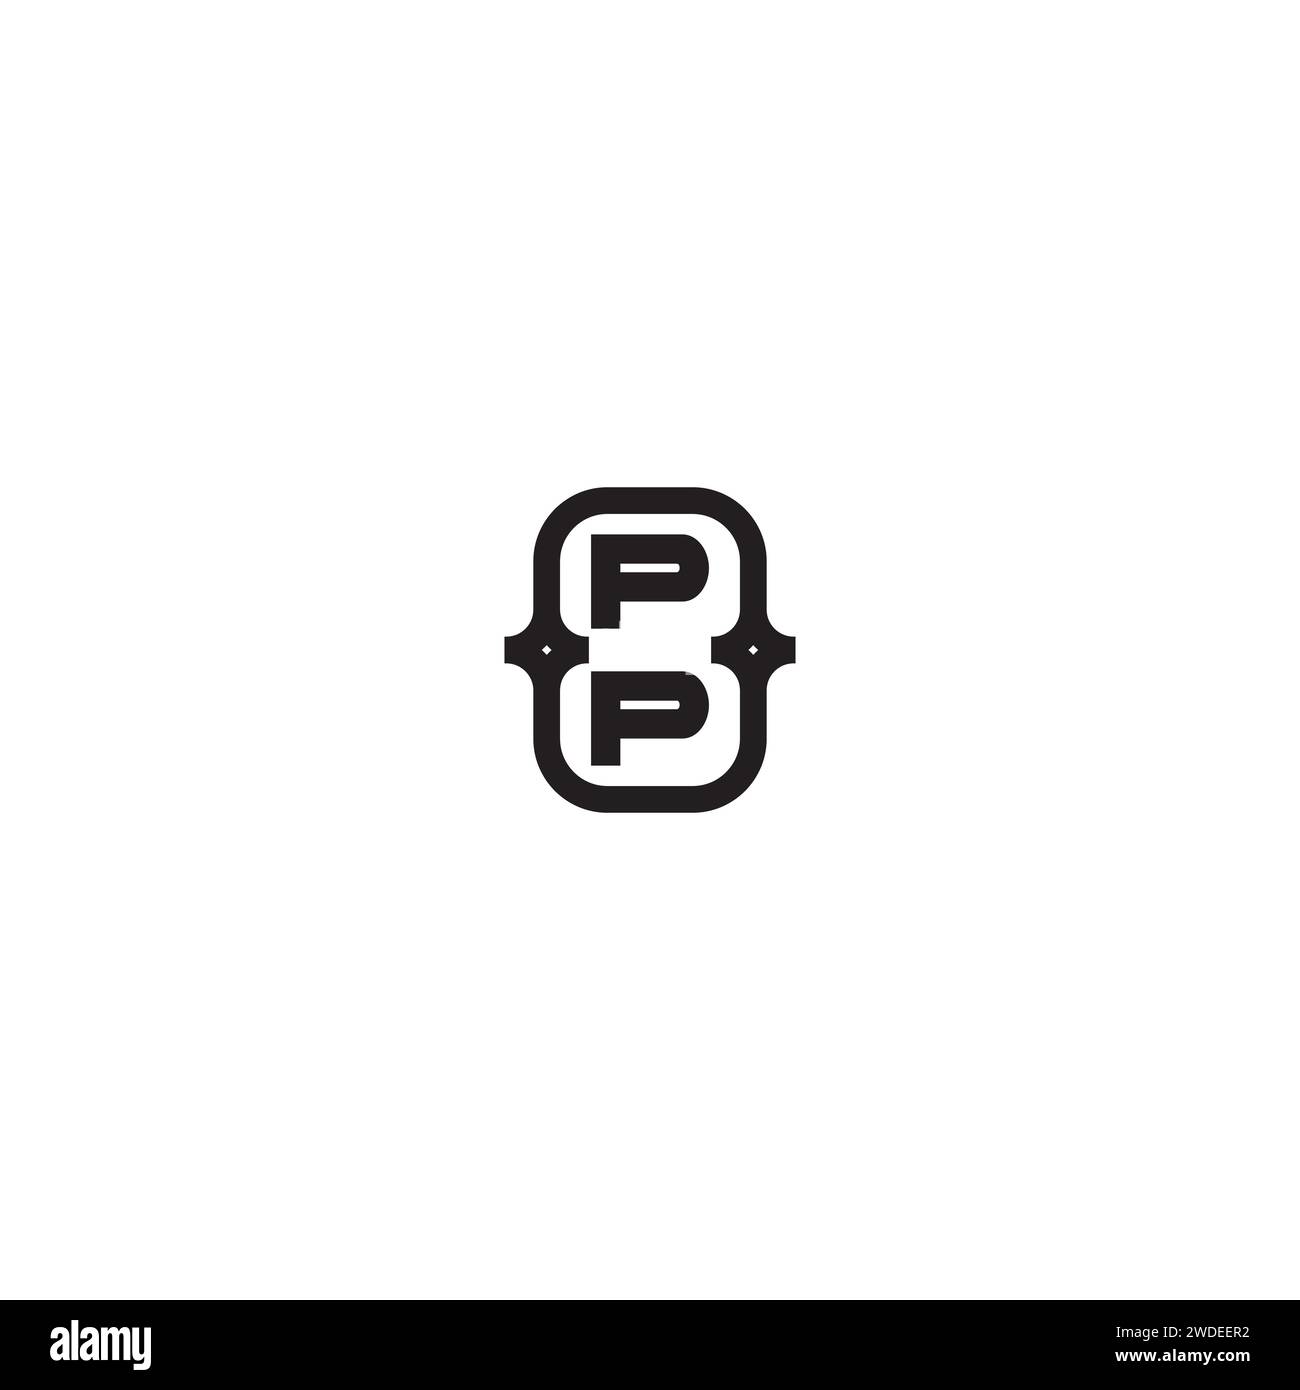 PP line bold concept in high quality professional design that will print well across any print media Stock Vector